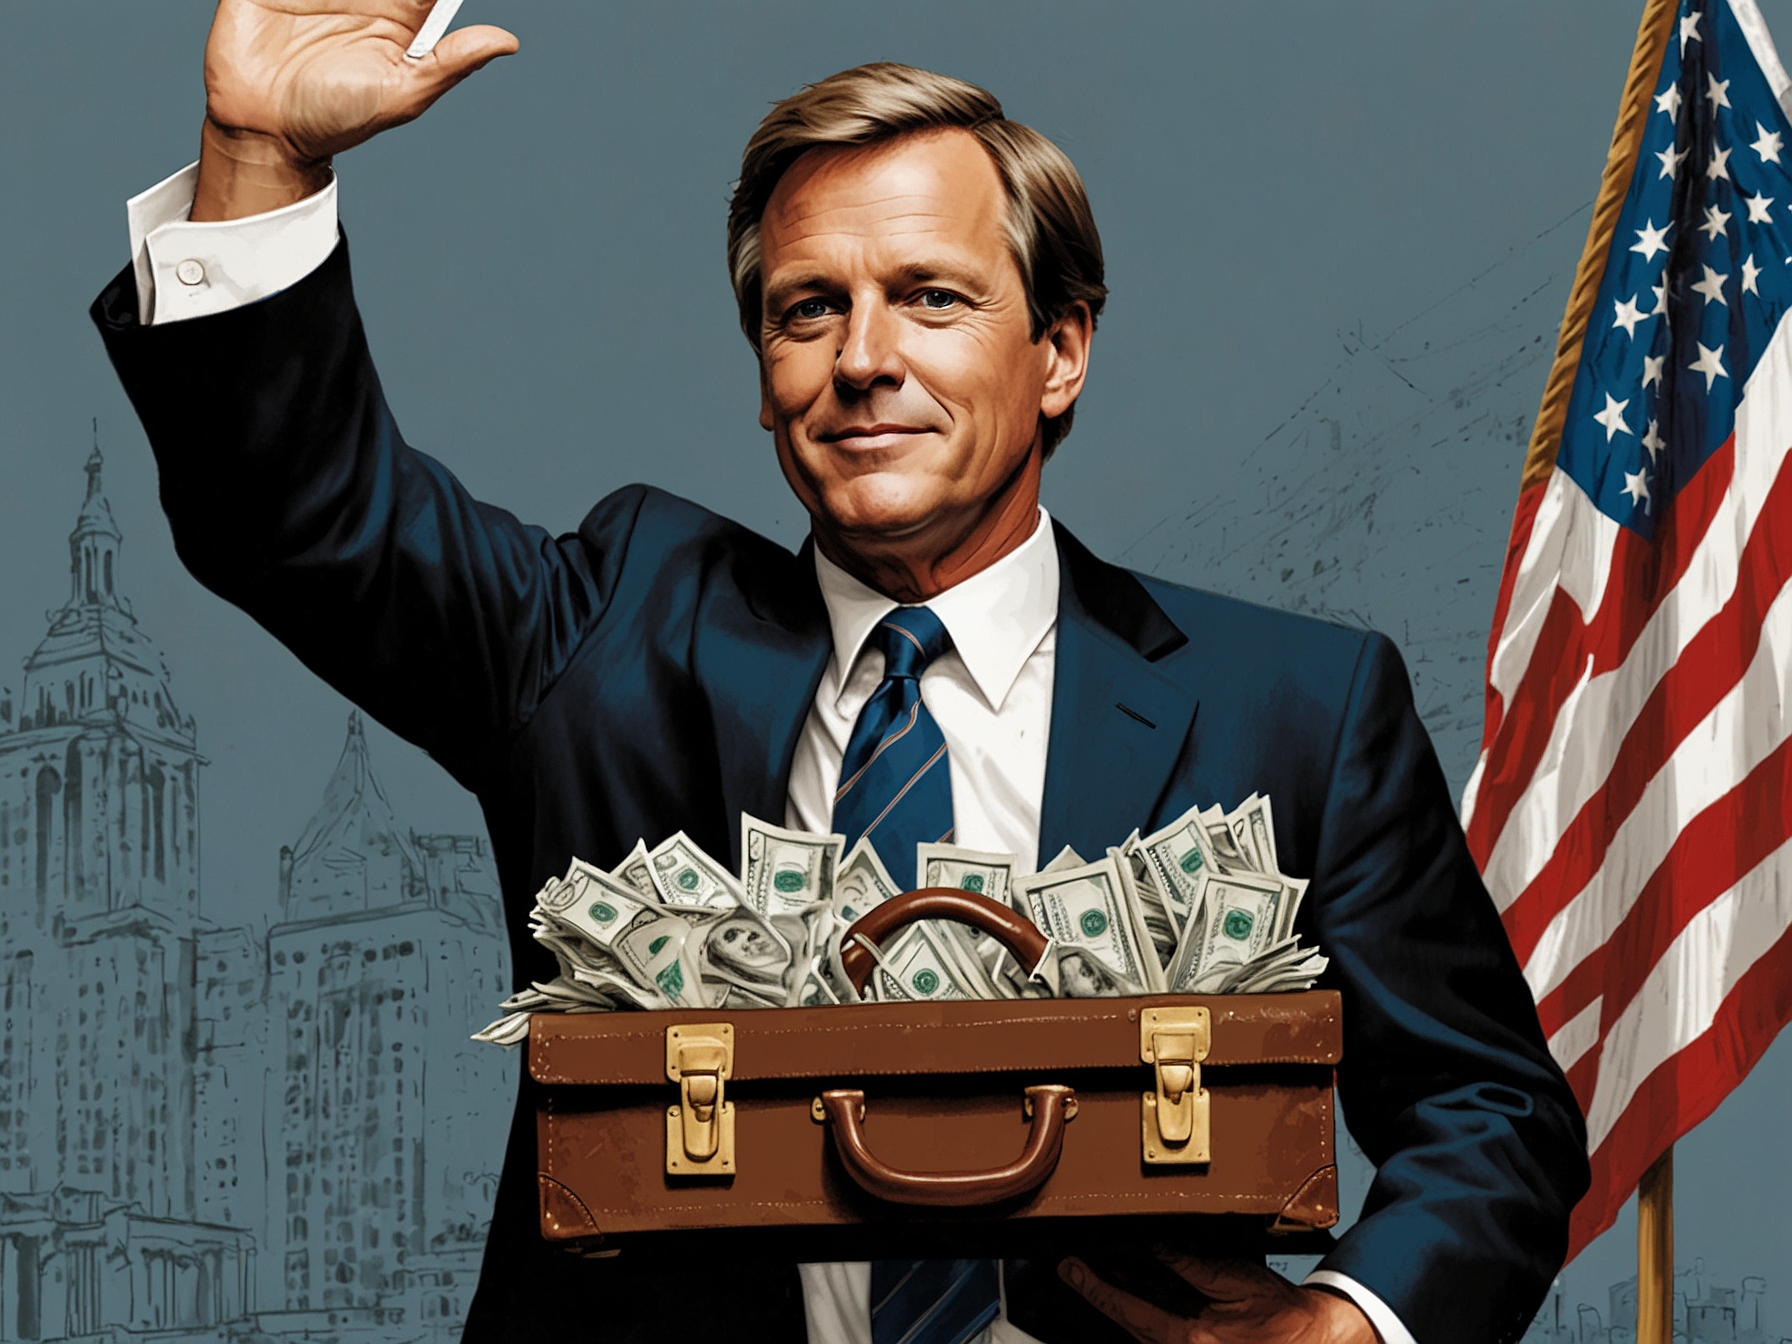 Illustration of Timothy Mellon holding a briefcase full of cash, symbolizing his $100 million donation to Trump's and RFK Jr.'s super PACs, affecting the US political scene.